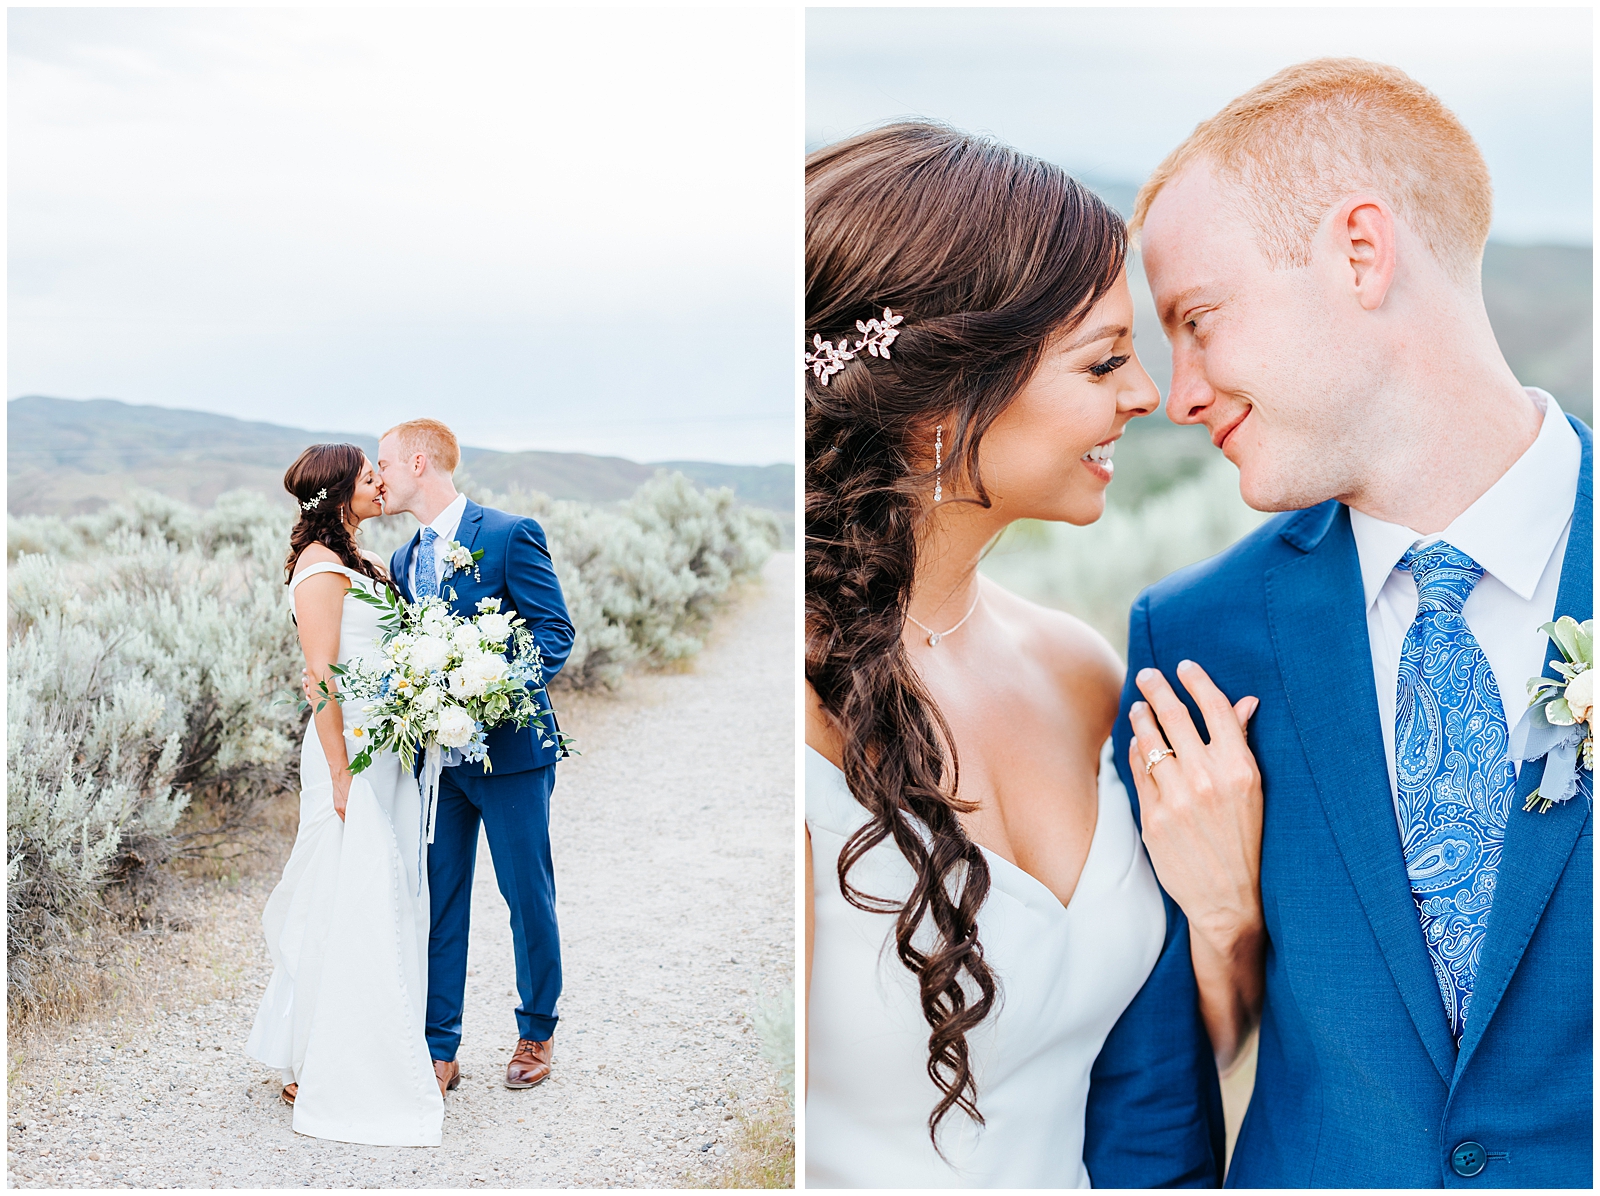 Sweet moments between the bride and groom at Idaho Foothills Wedding Golden Hour Photos